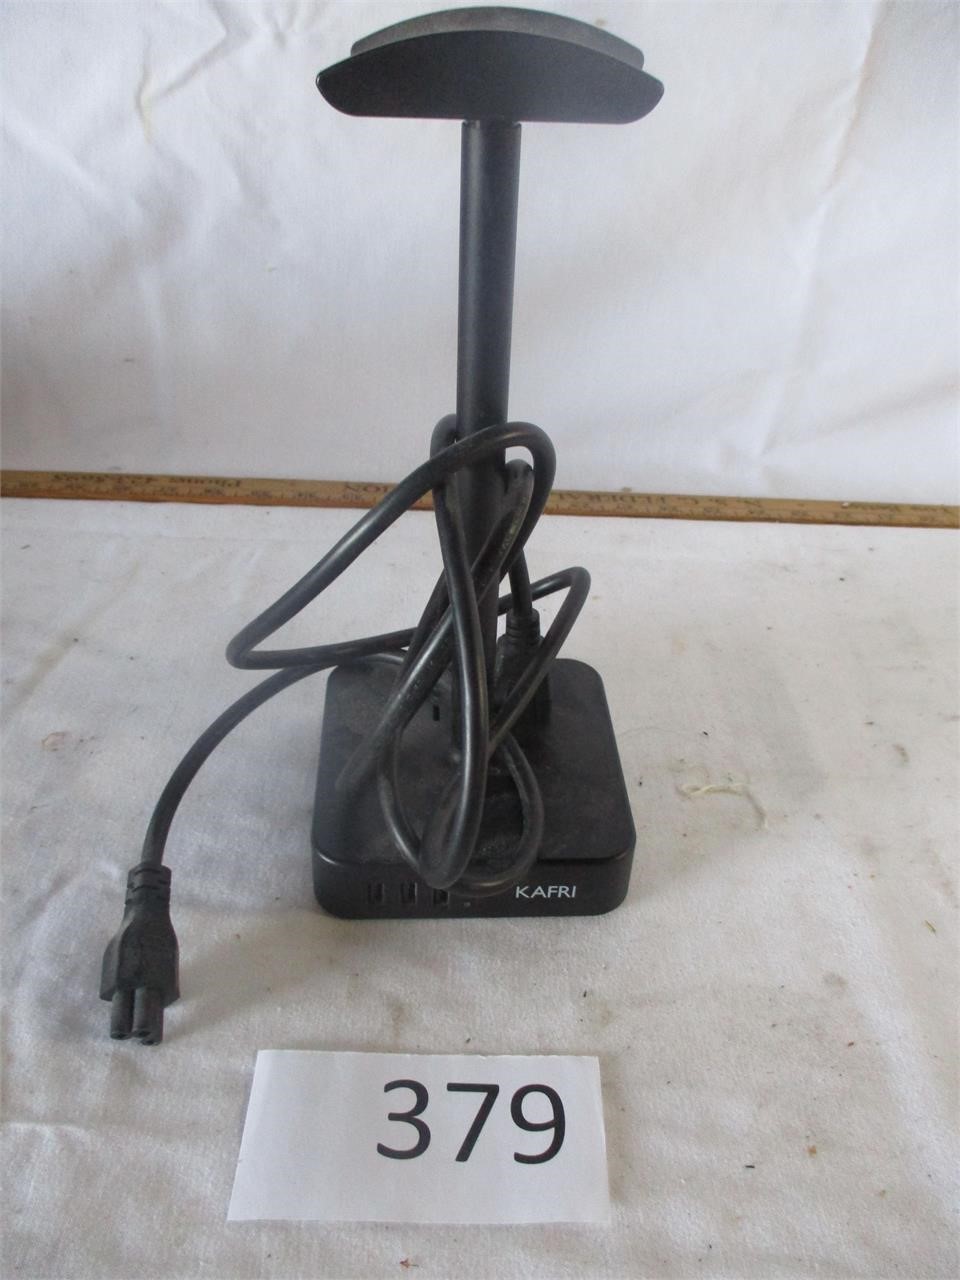 Head Phone Charger & Stand